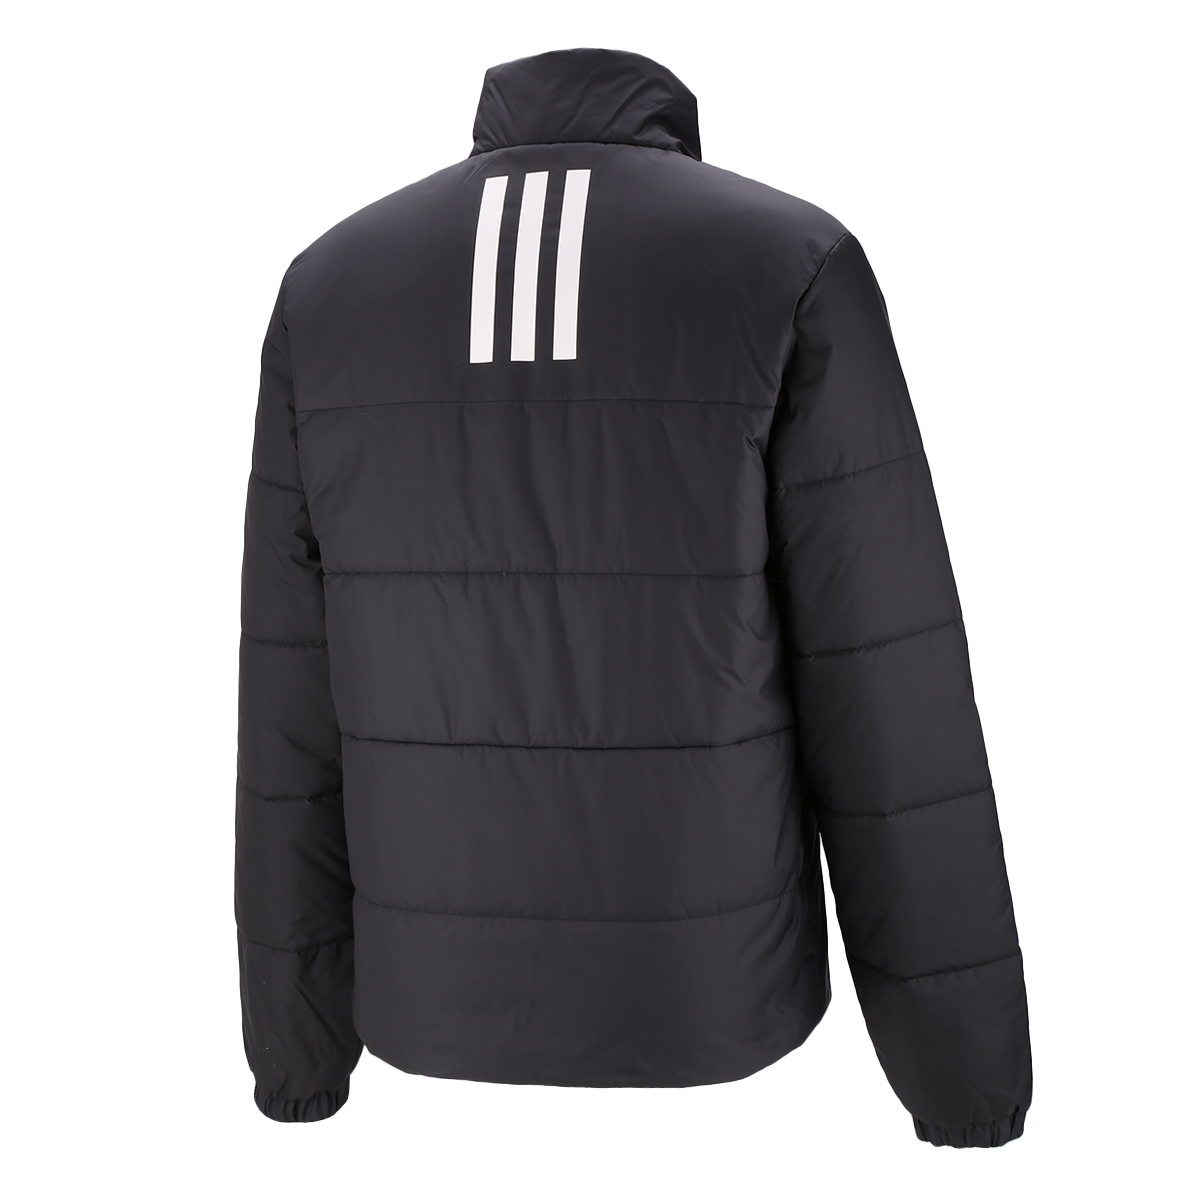 Campera adidas Bsc 3 Stripes,  image number null